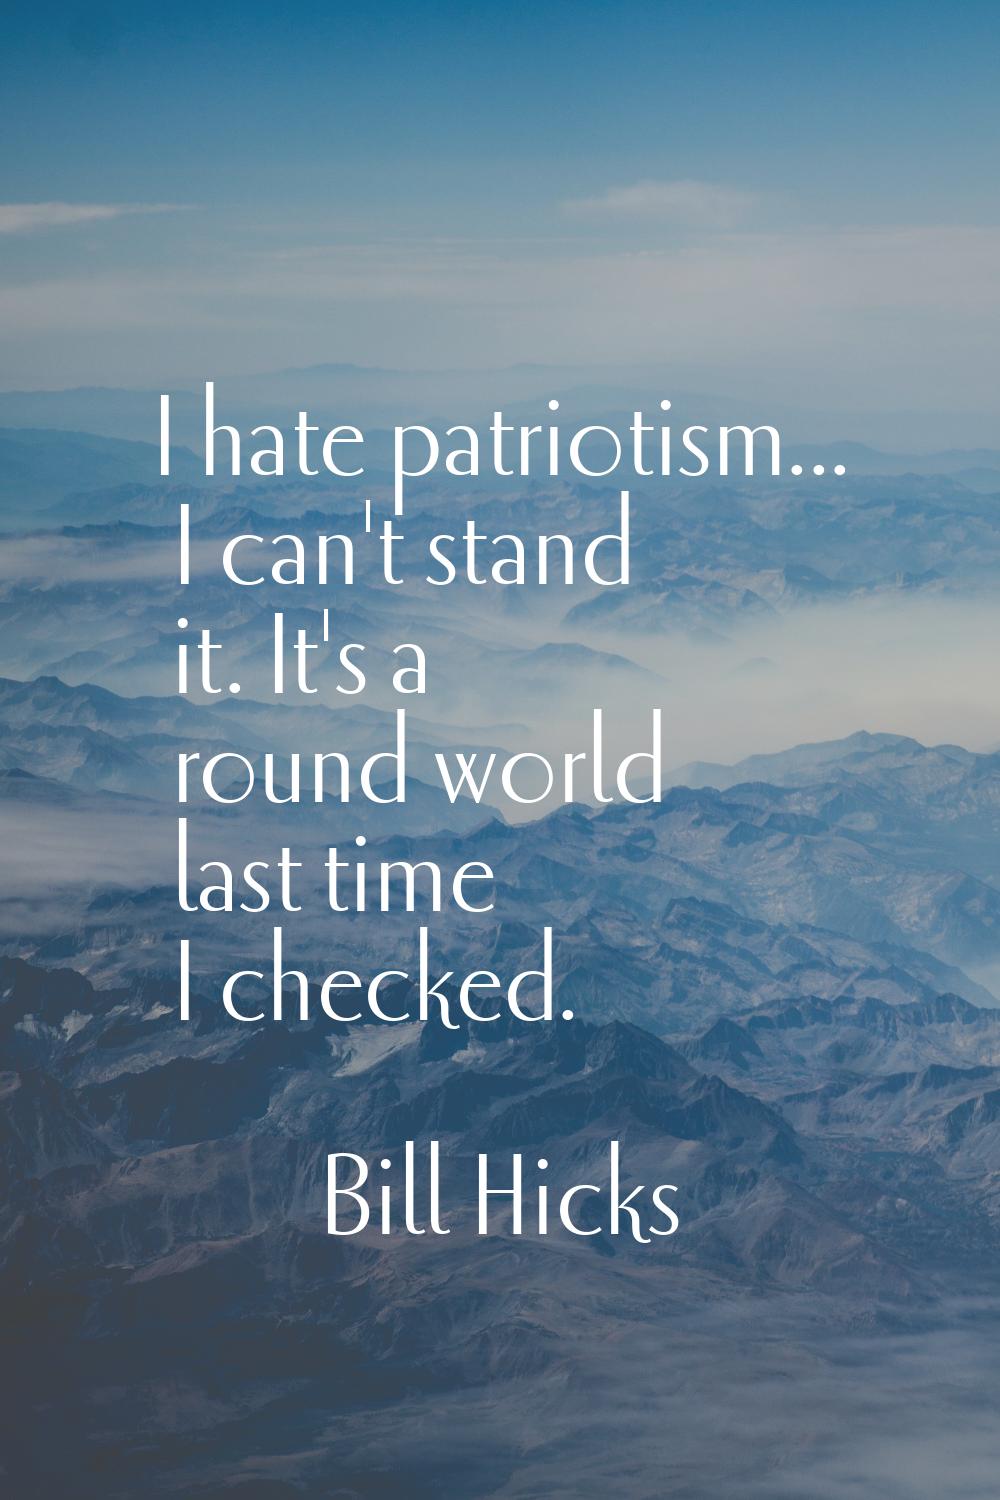 I hate patriotism... I can't stand it. It's a round world last time I checked.